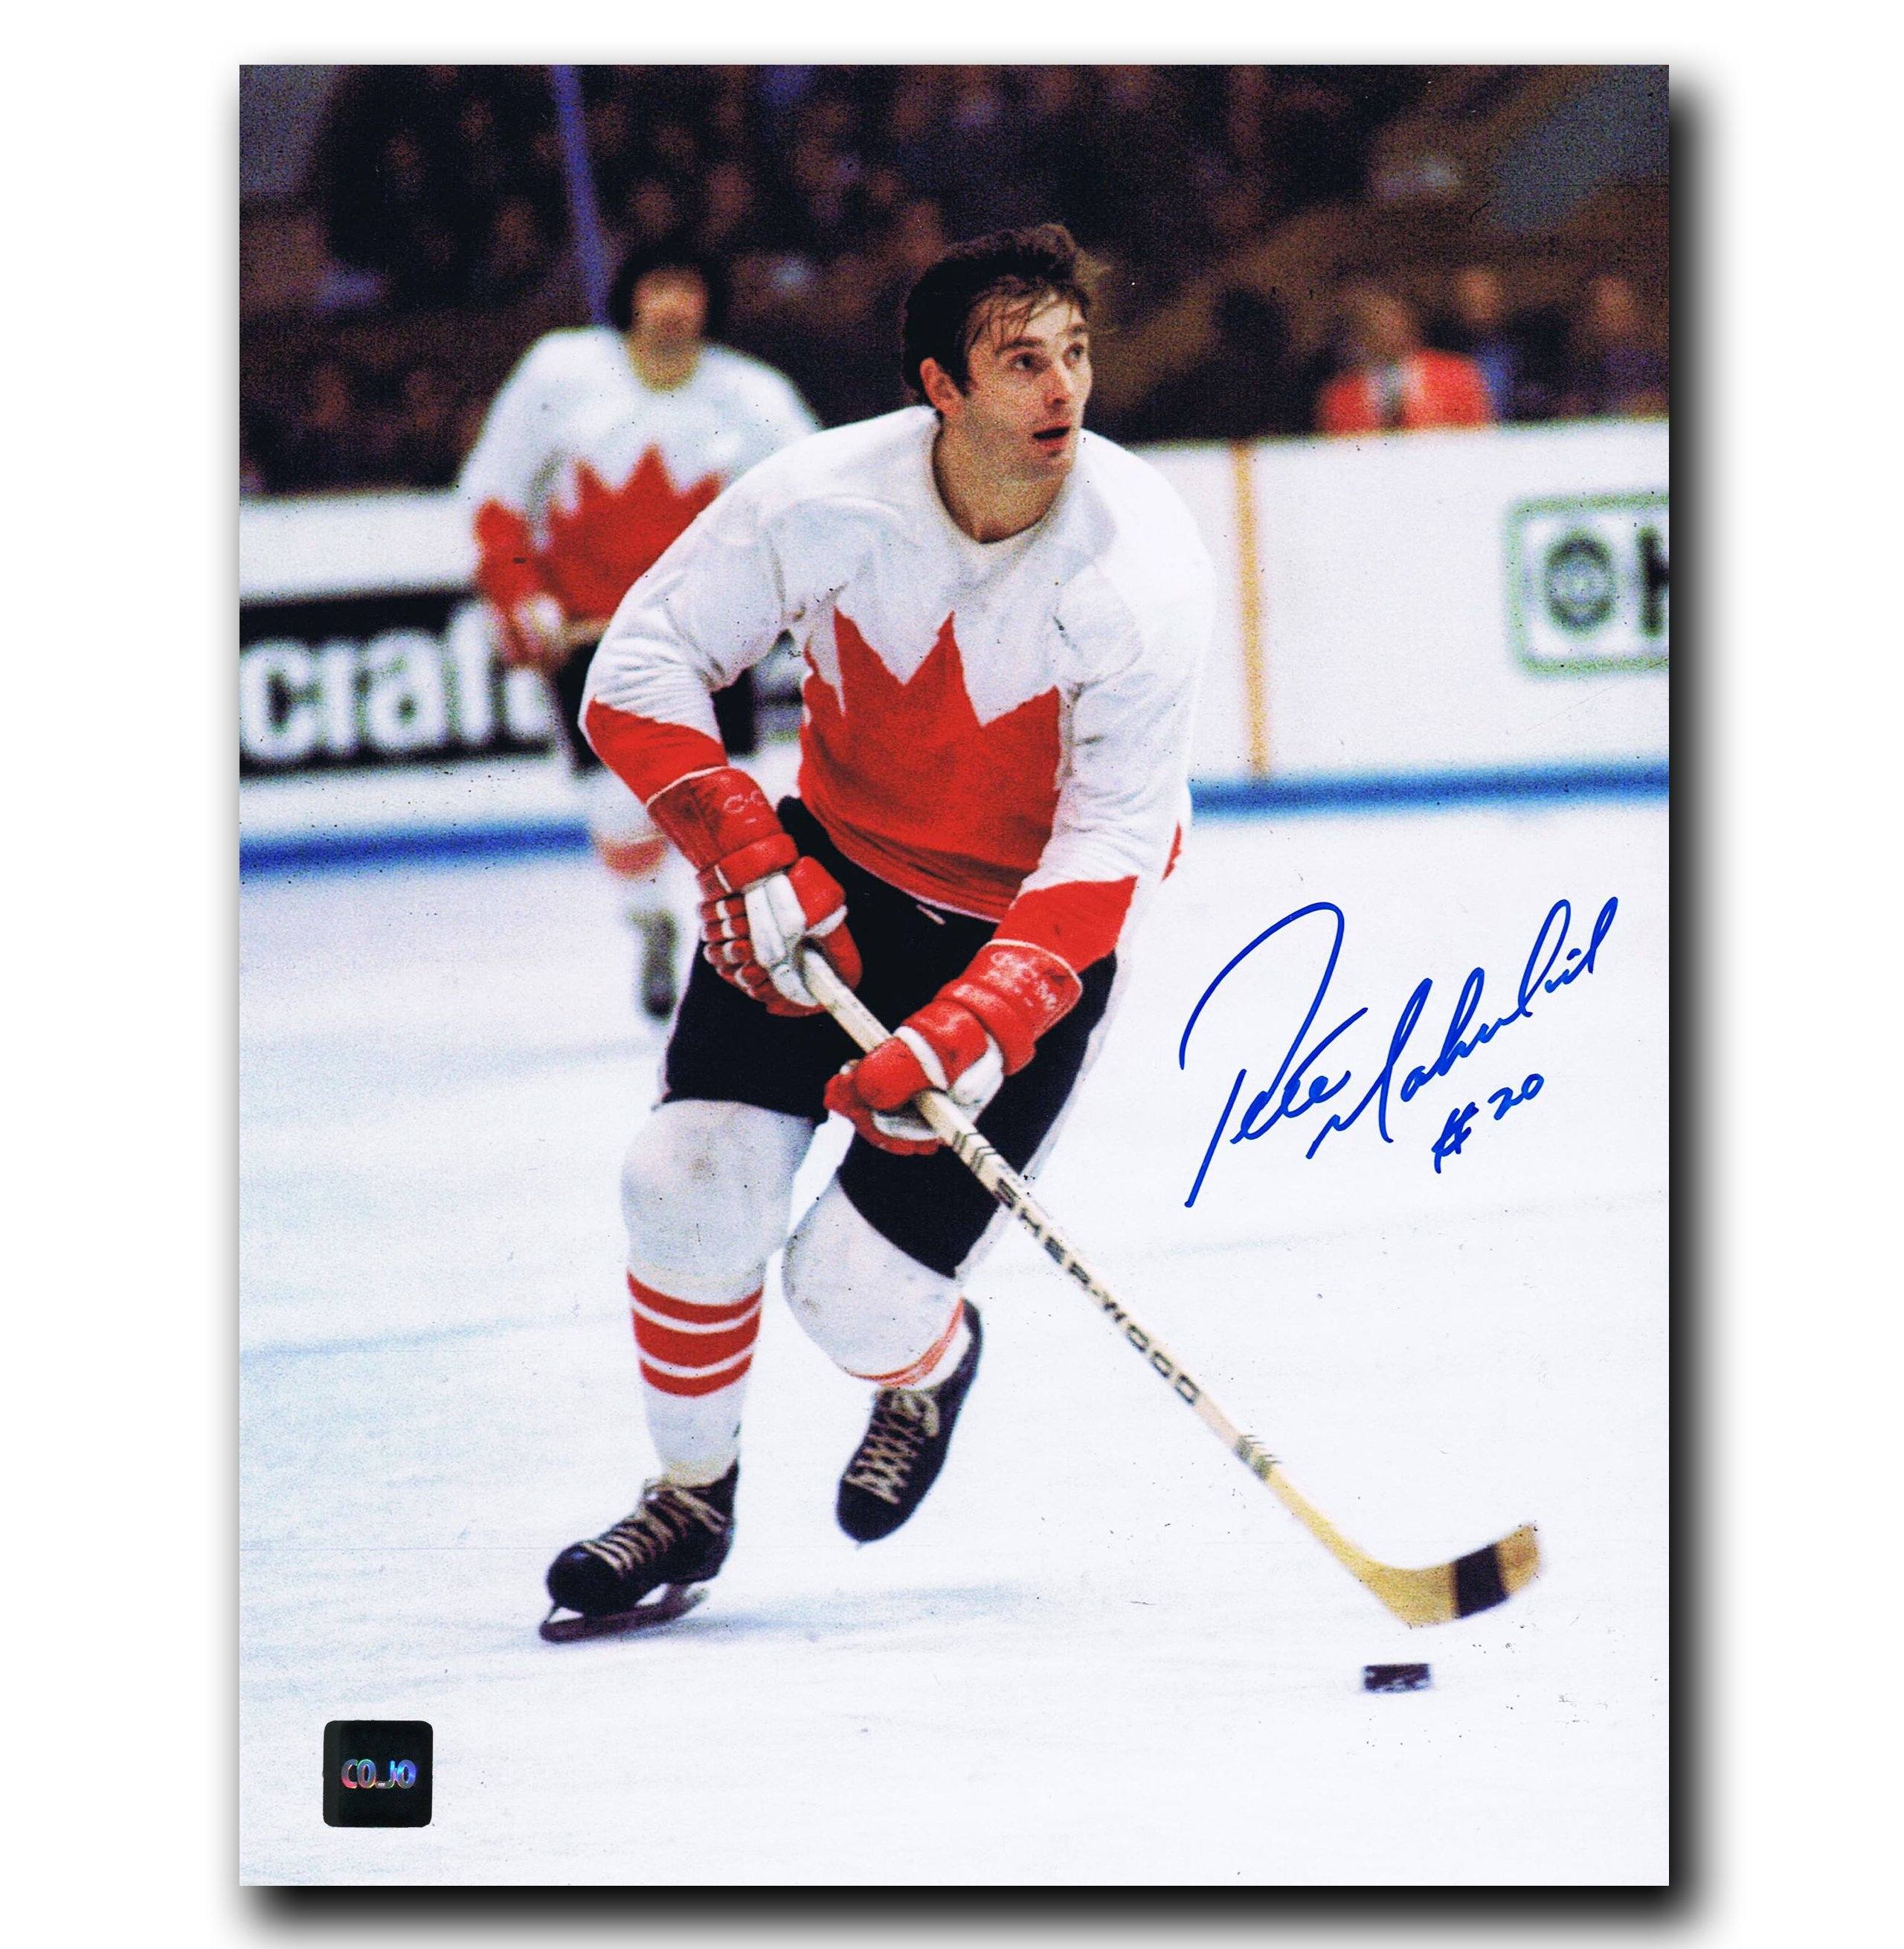 Peter Mahovlich Montreal Canadiens Autographed 8x10